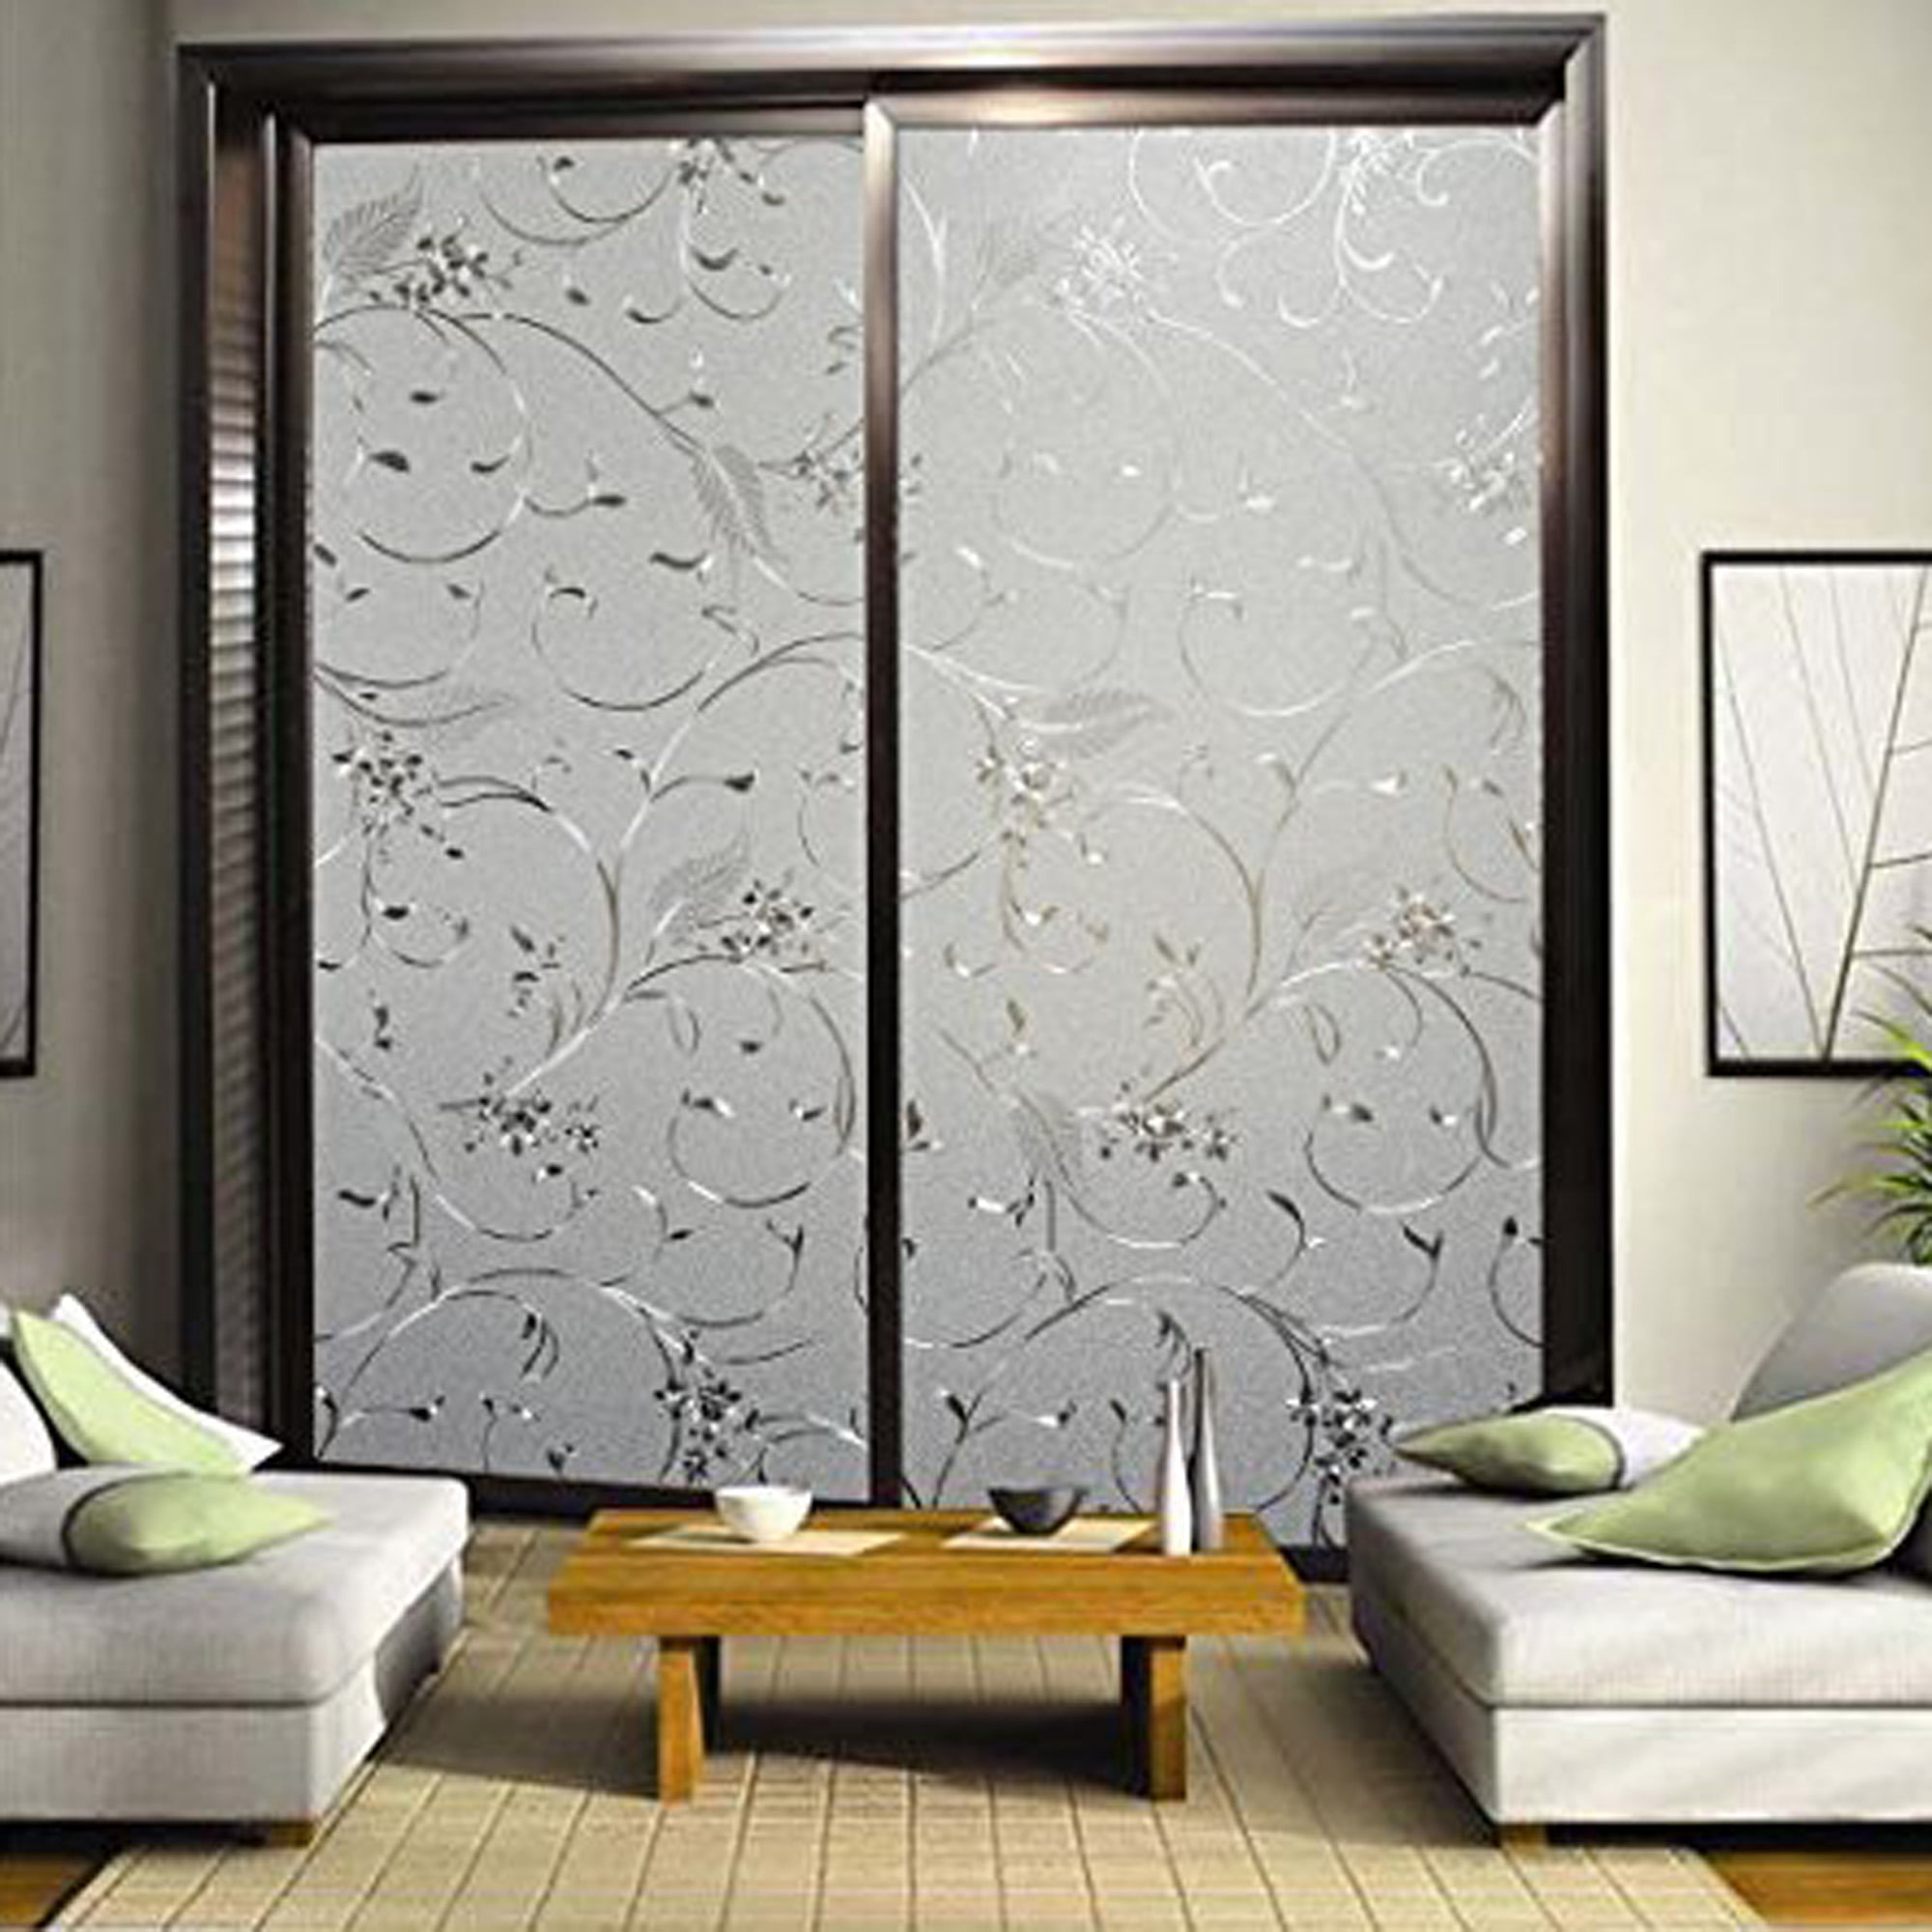 Details about   Frosted Static Cling Cover Window Glass Film Stickers Privacy Home Modern Decor 